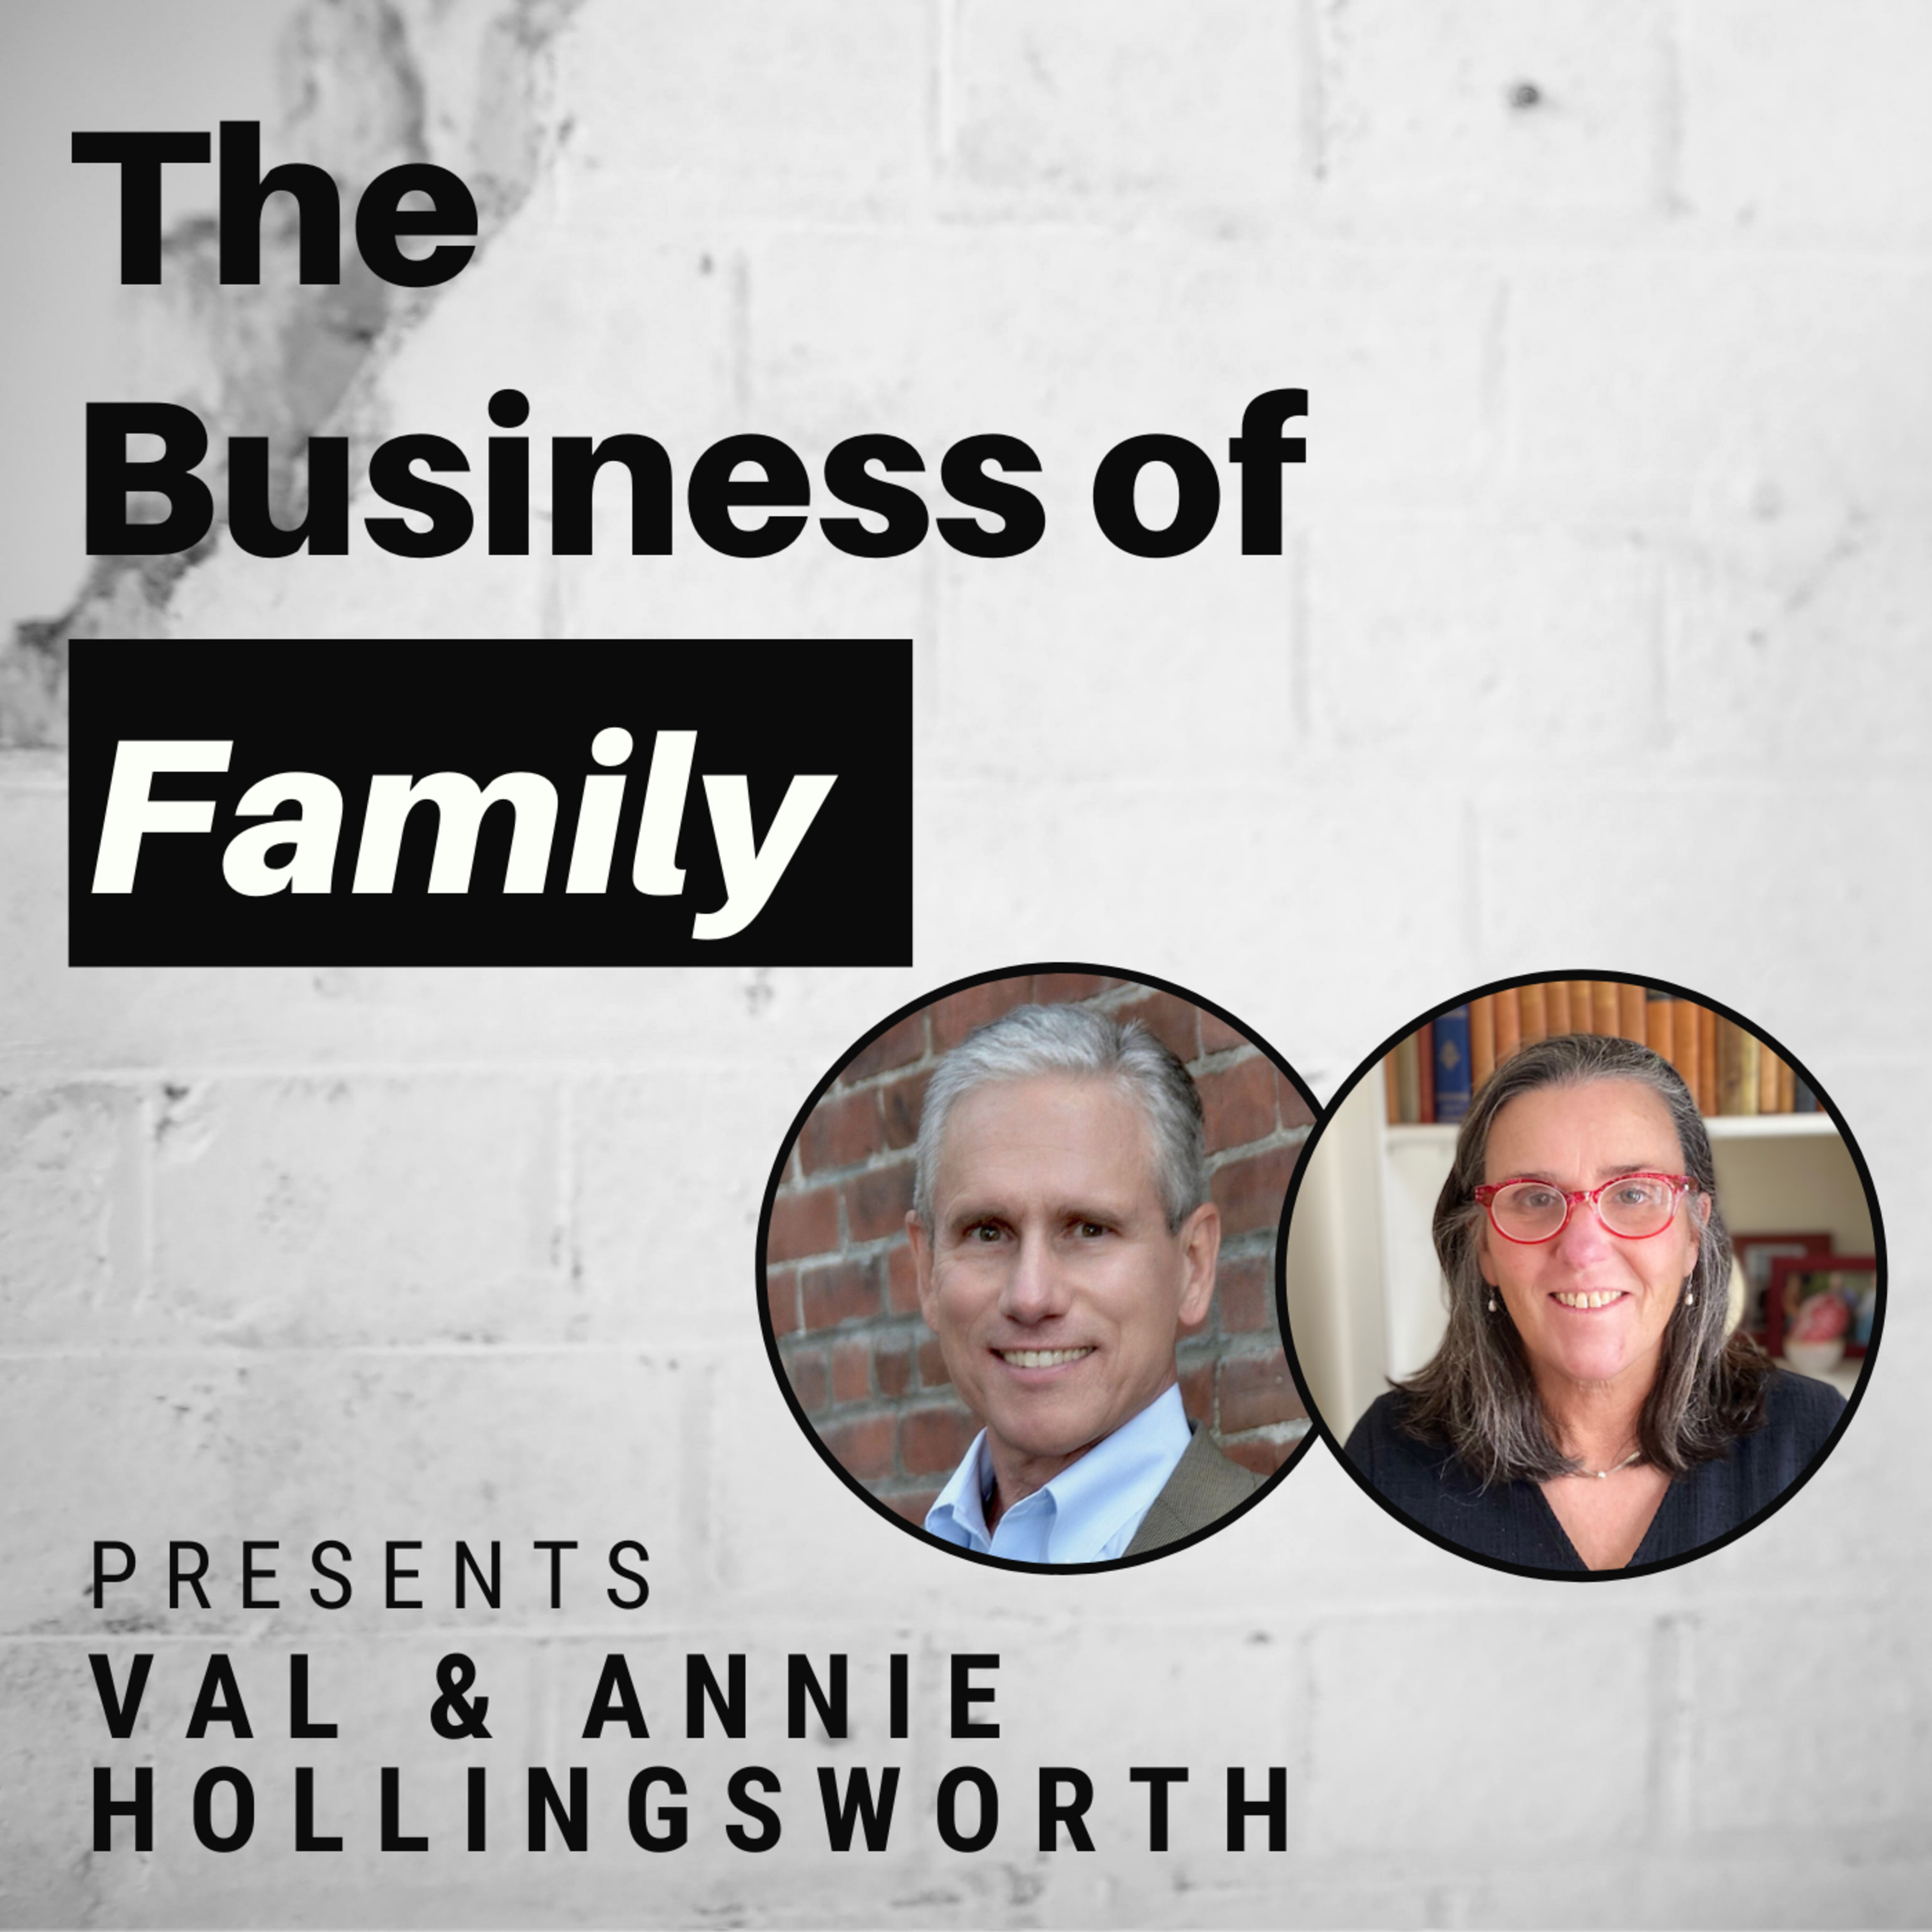 Val & Annie Hollingsworth - 7th Gen Hollingsworth & Vose - Manufacturing Innovation Since 1728  [The Business of Family]